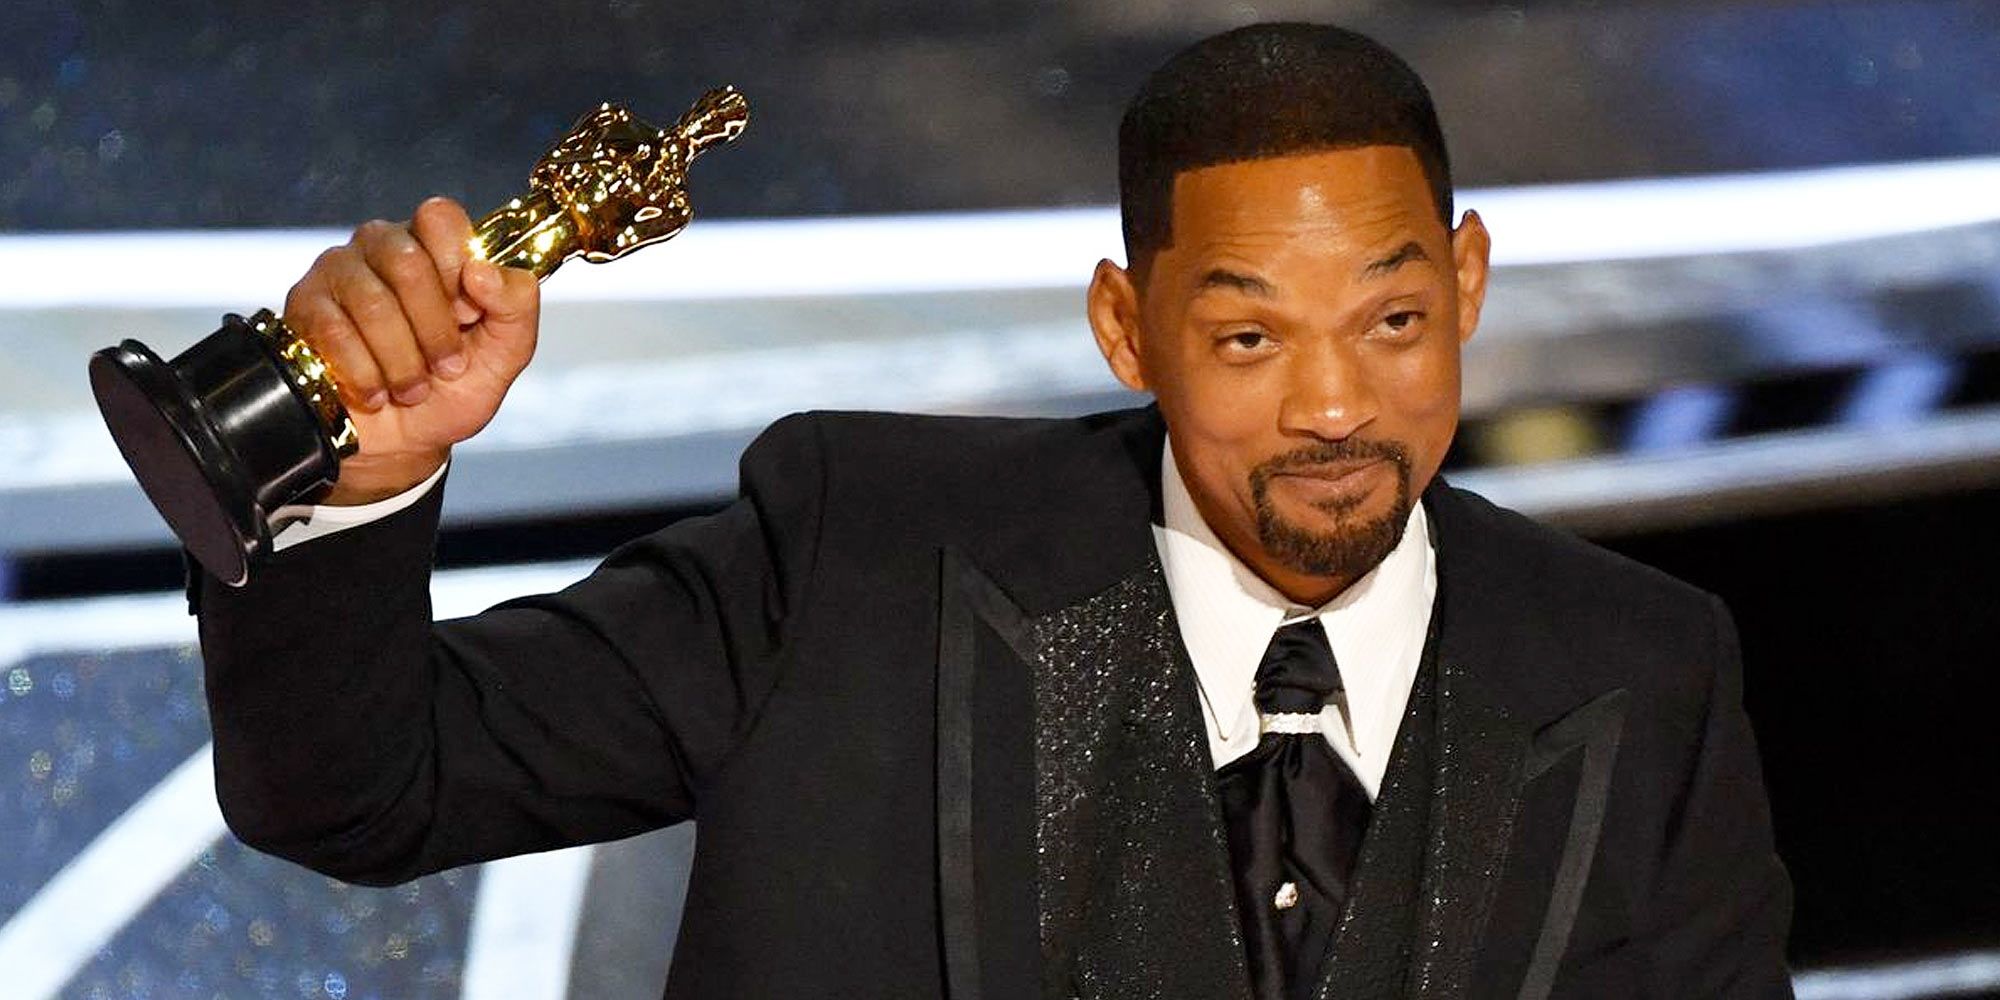 will smith will not lose oscar after chris rock incident